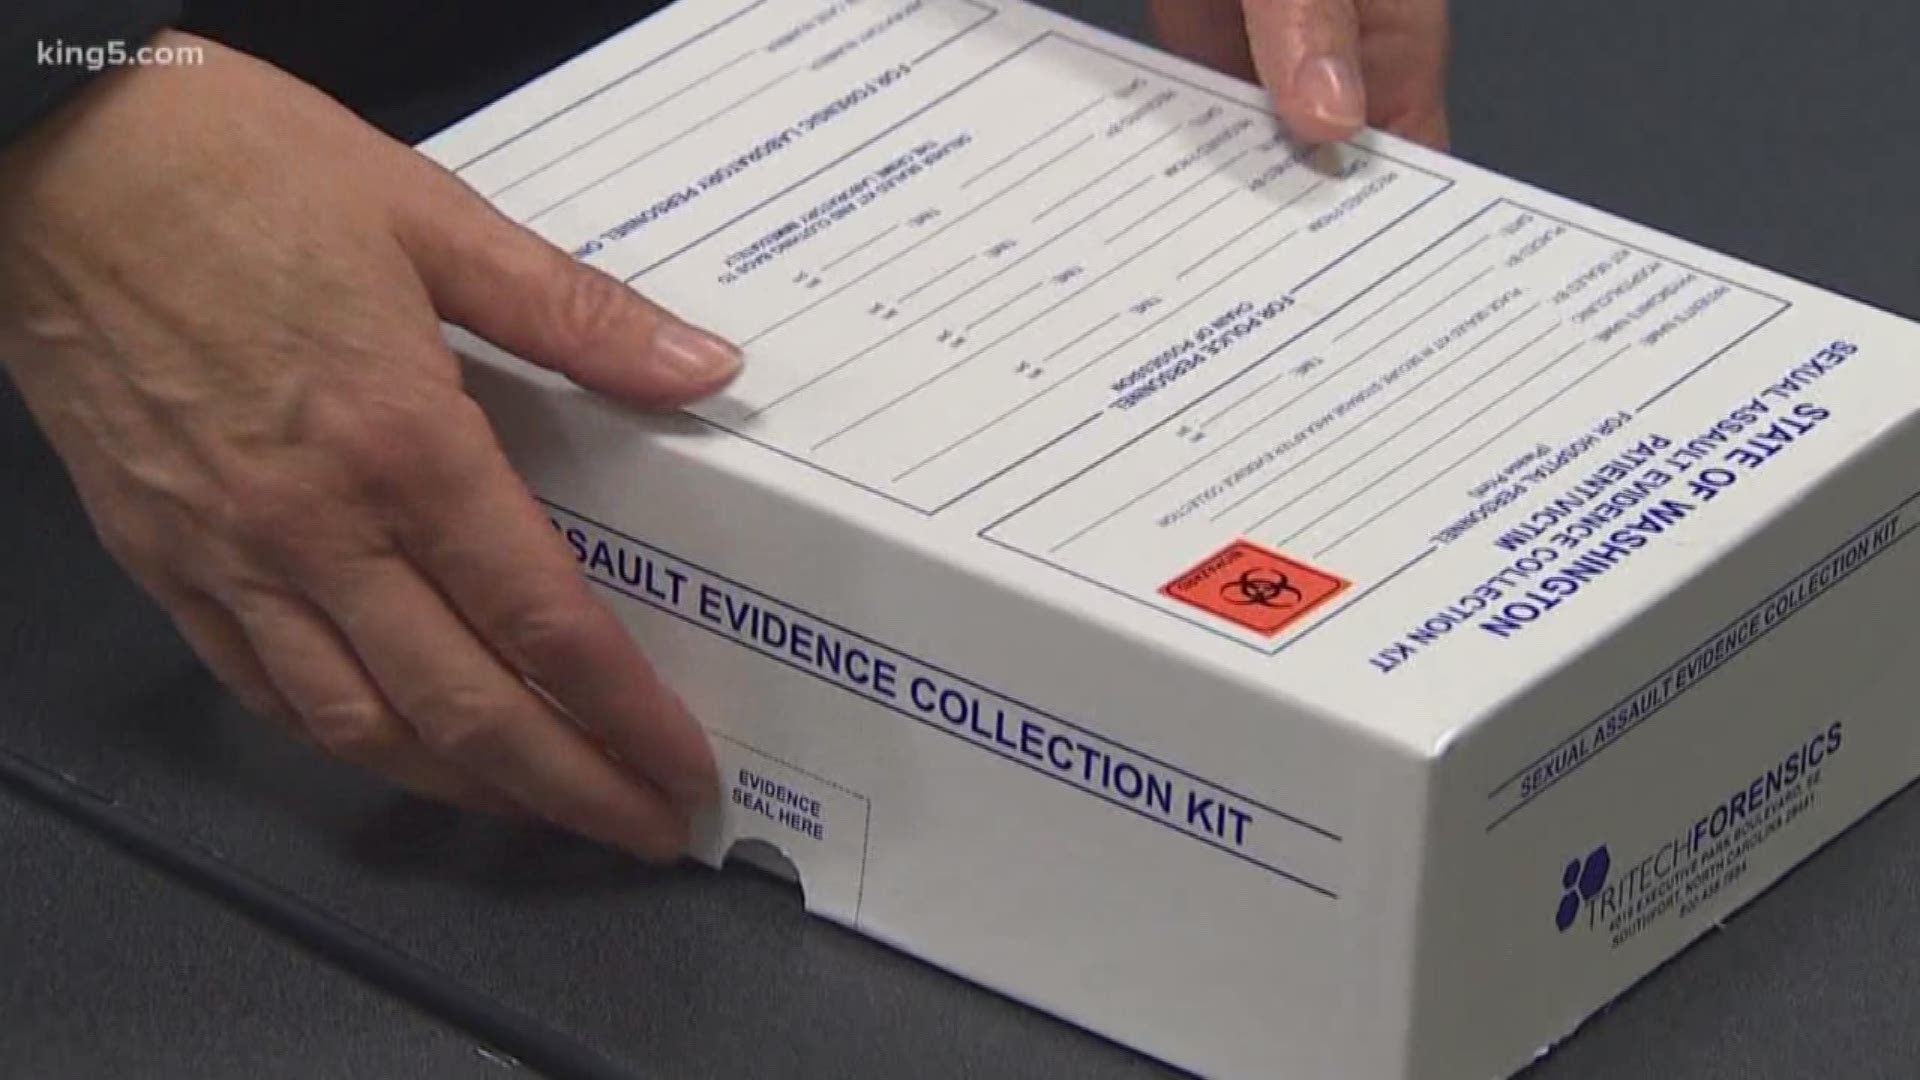 Rape survivors say the state owes them an apology, and that apology may come in the form of a new law. More than 10,000 DNA samples from alleged rapes have not been tested by the state's crime lab. South Bureau Chief Drew Mikkelsen found out the state's rape kit backlog may be history soon, thanks to personal testimony from a Pierce County woman.